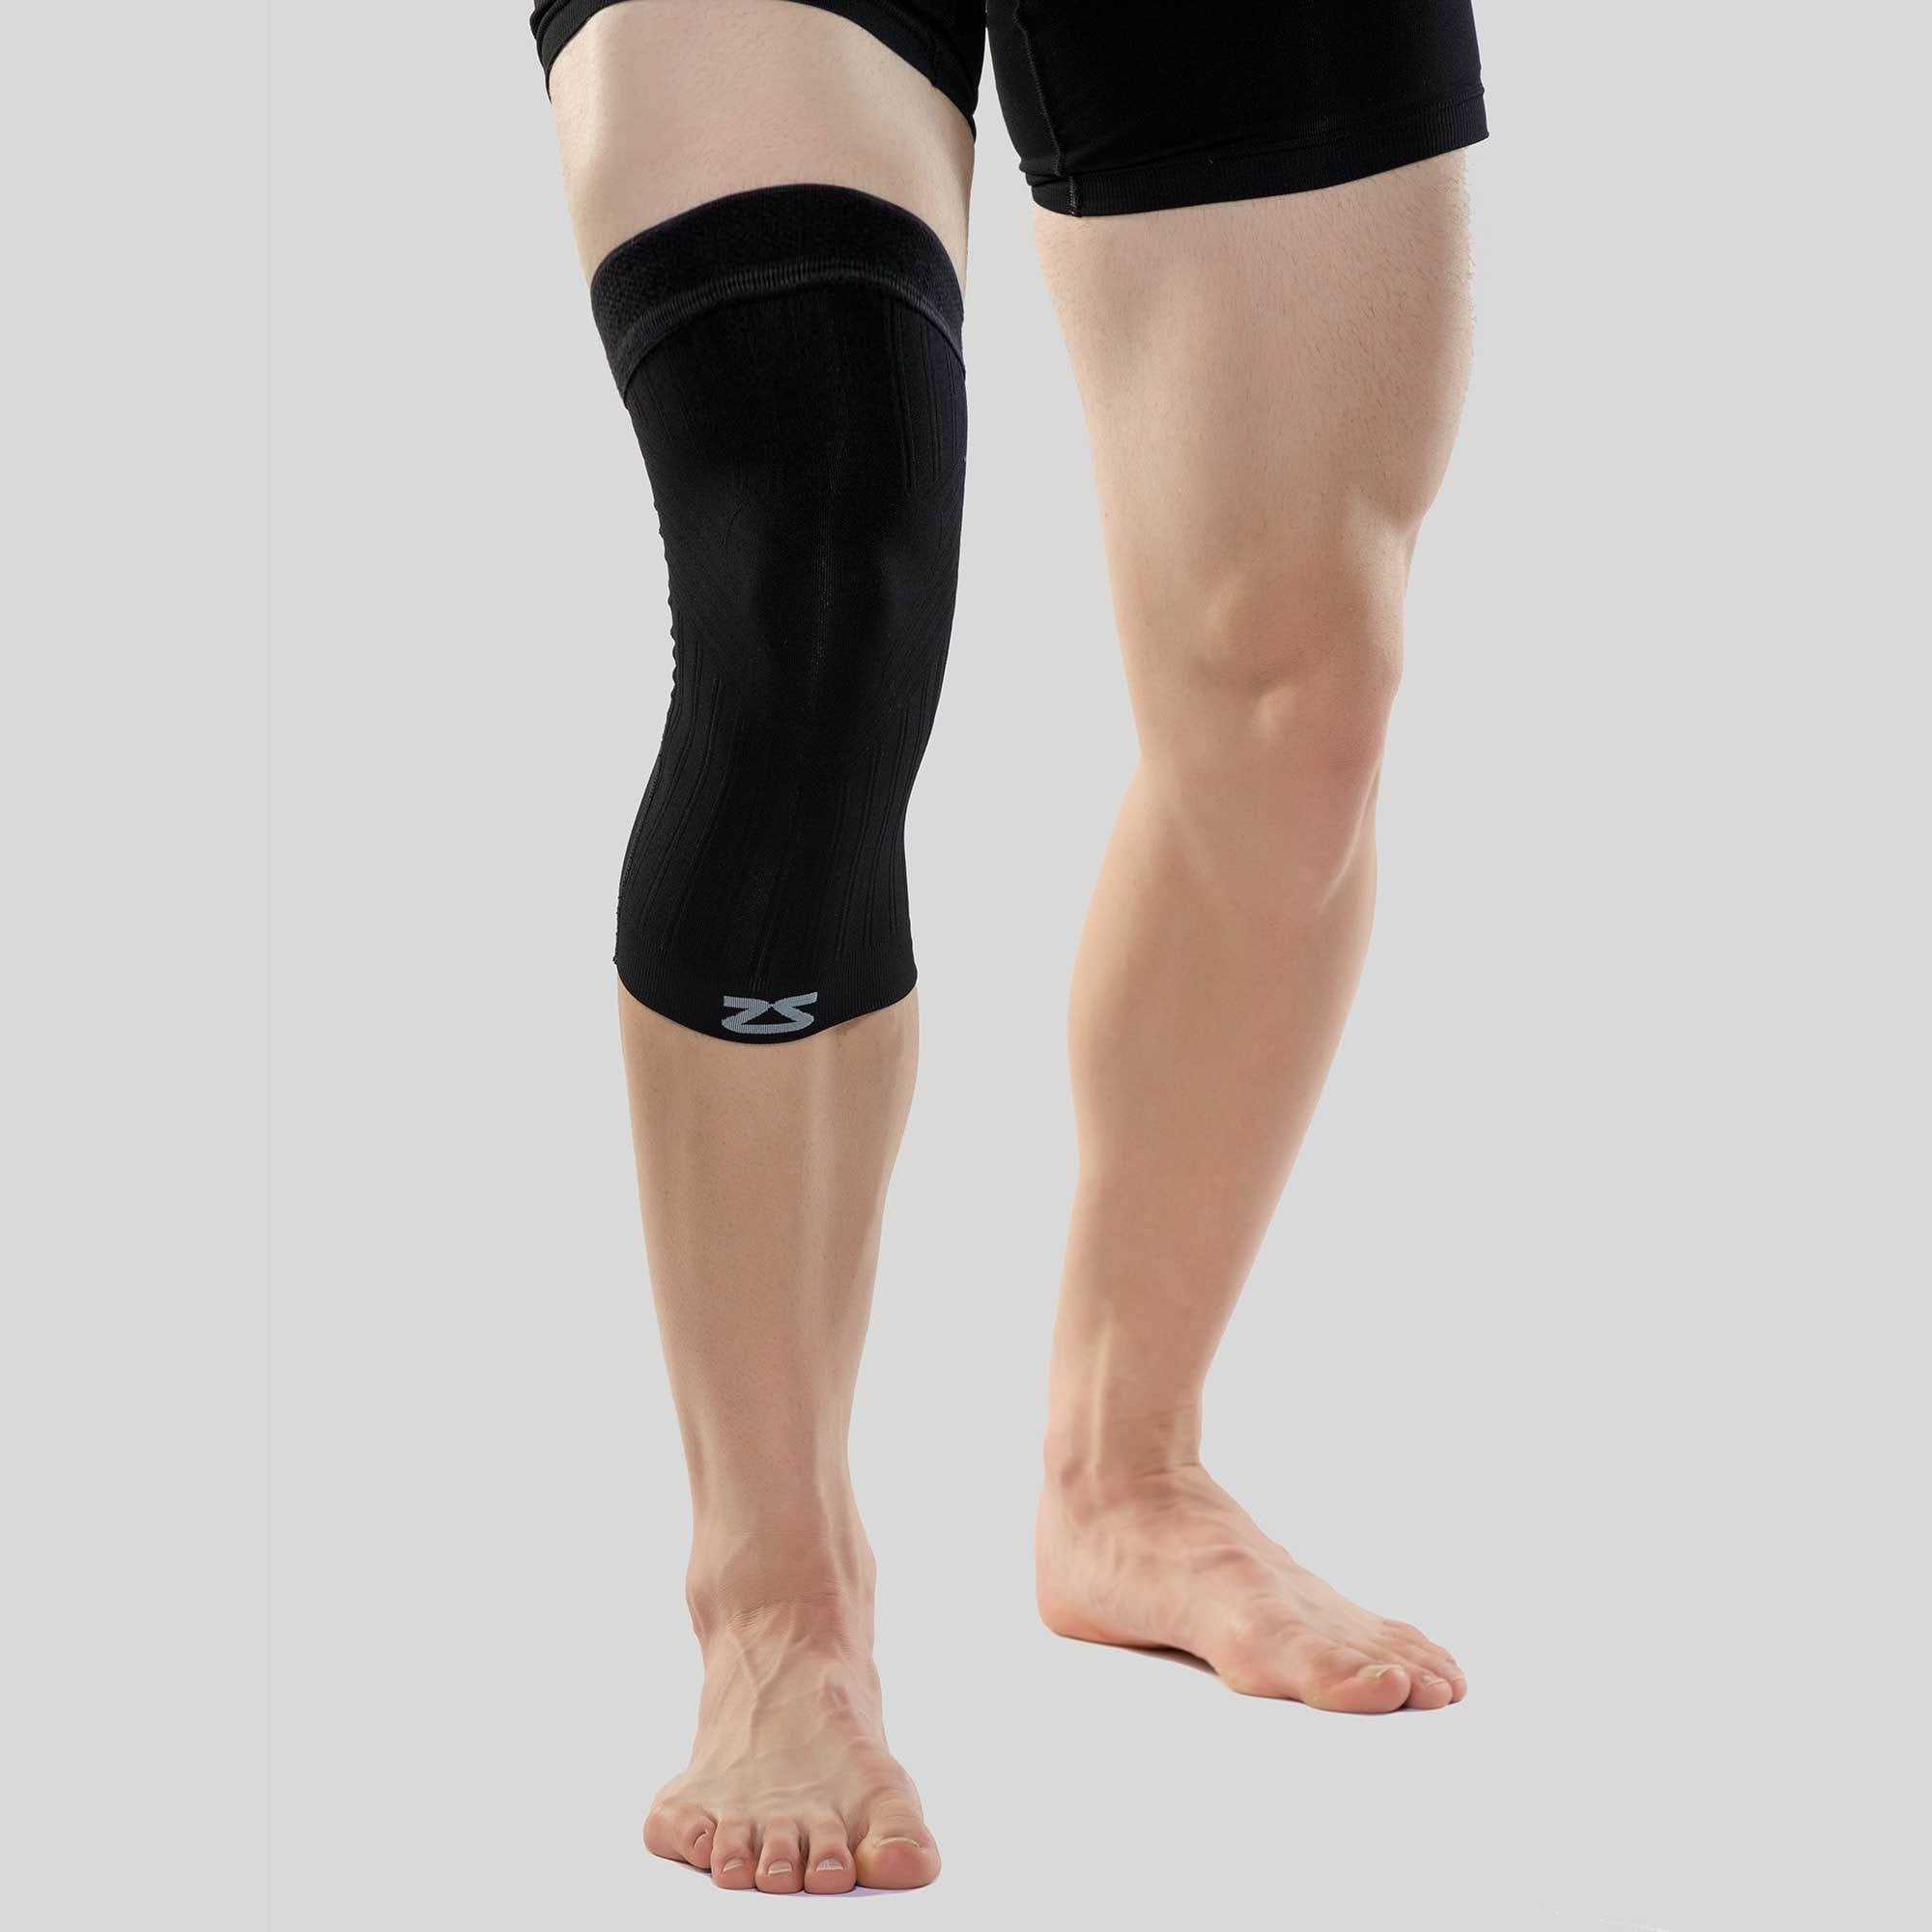 Thigh Compression Sleeve Thigh Brace(1Pair)-Hamstring Compression  Sleeve-Sciatica,Groin,Quad,Thigh Pain Relief & Recovery(Medium)